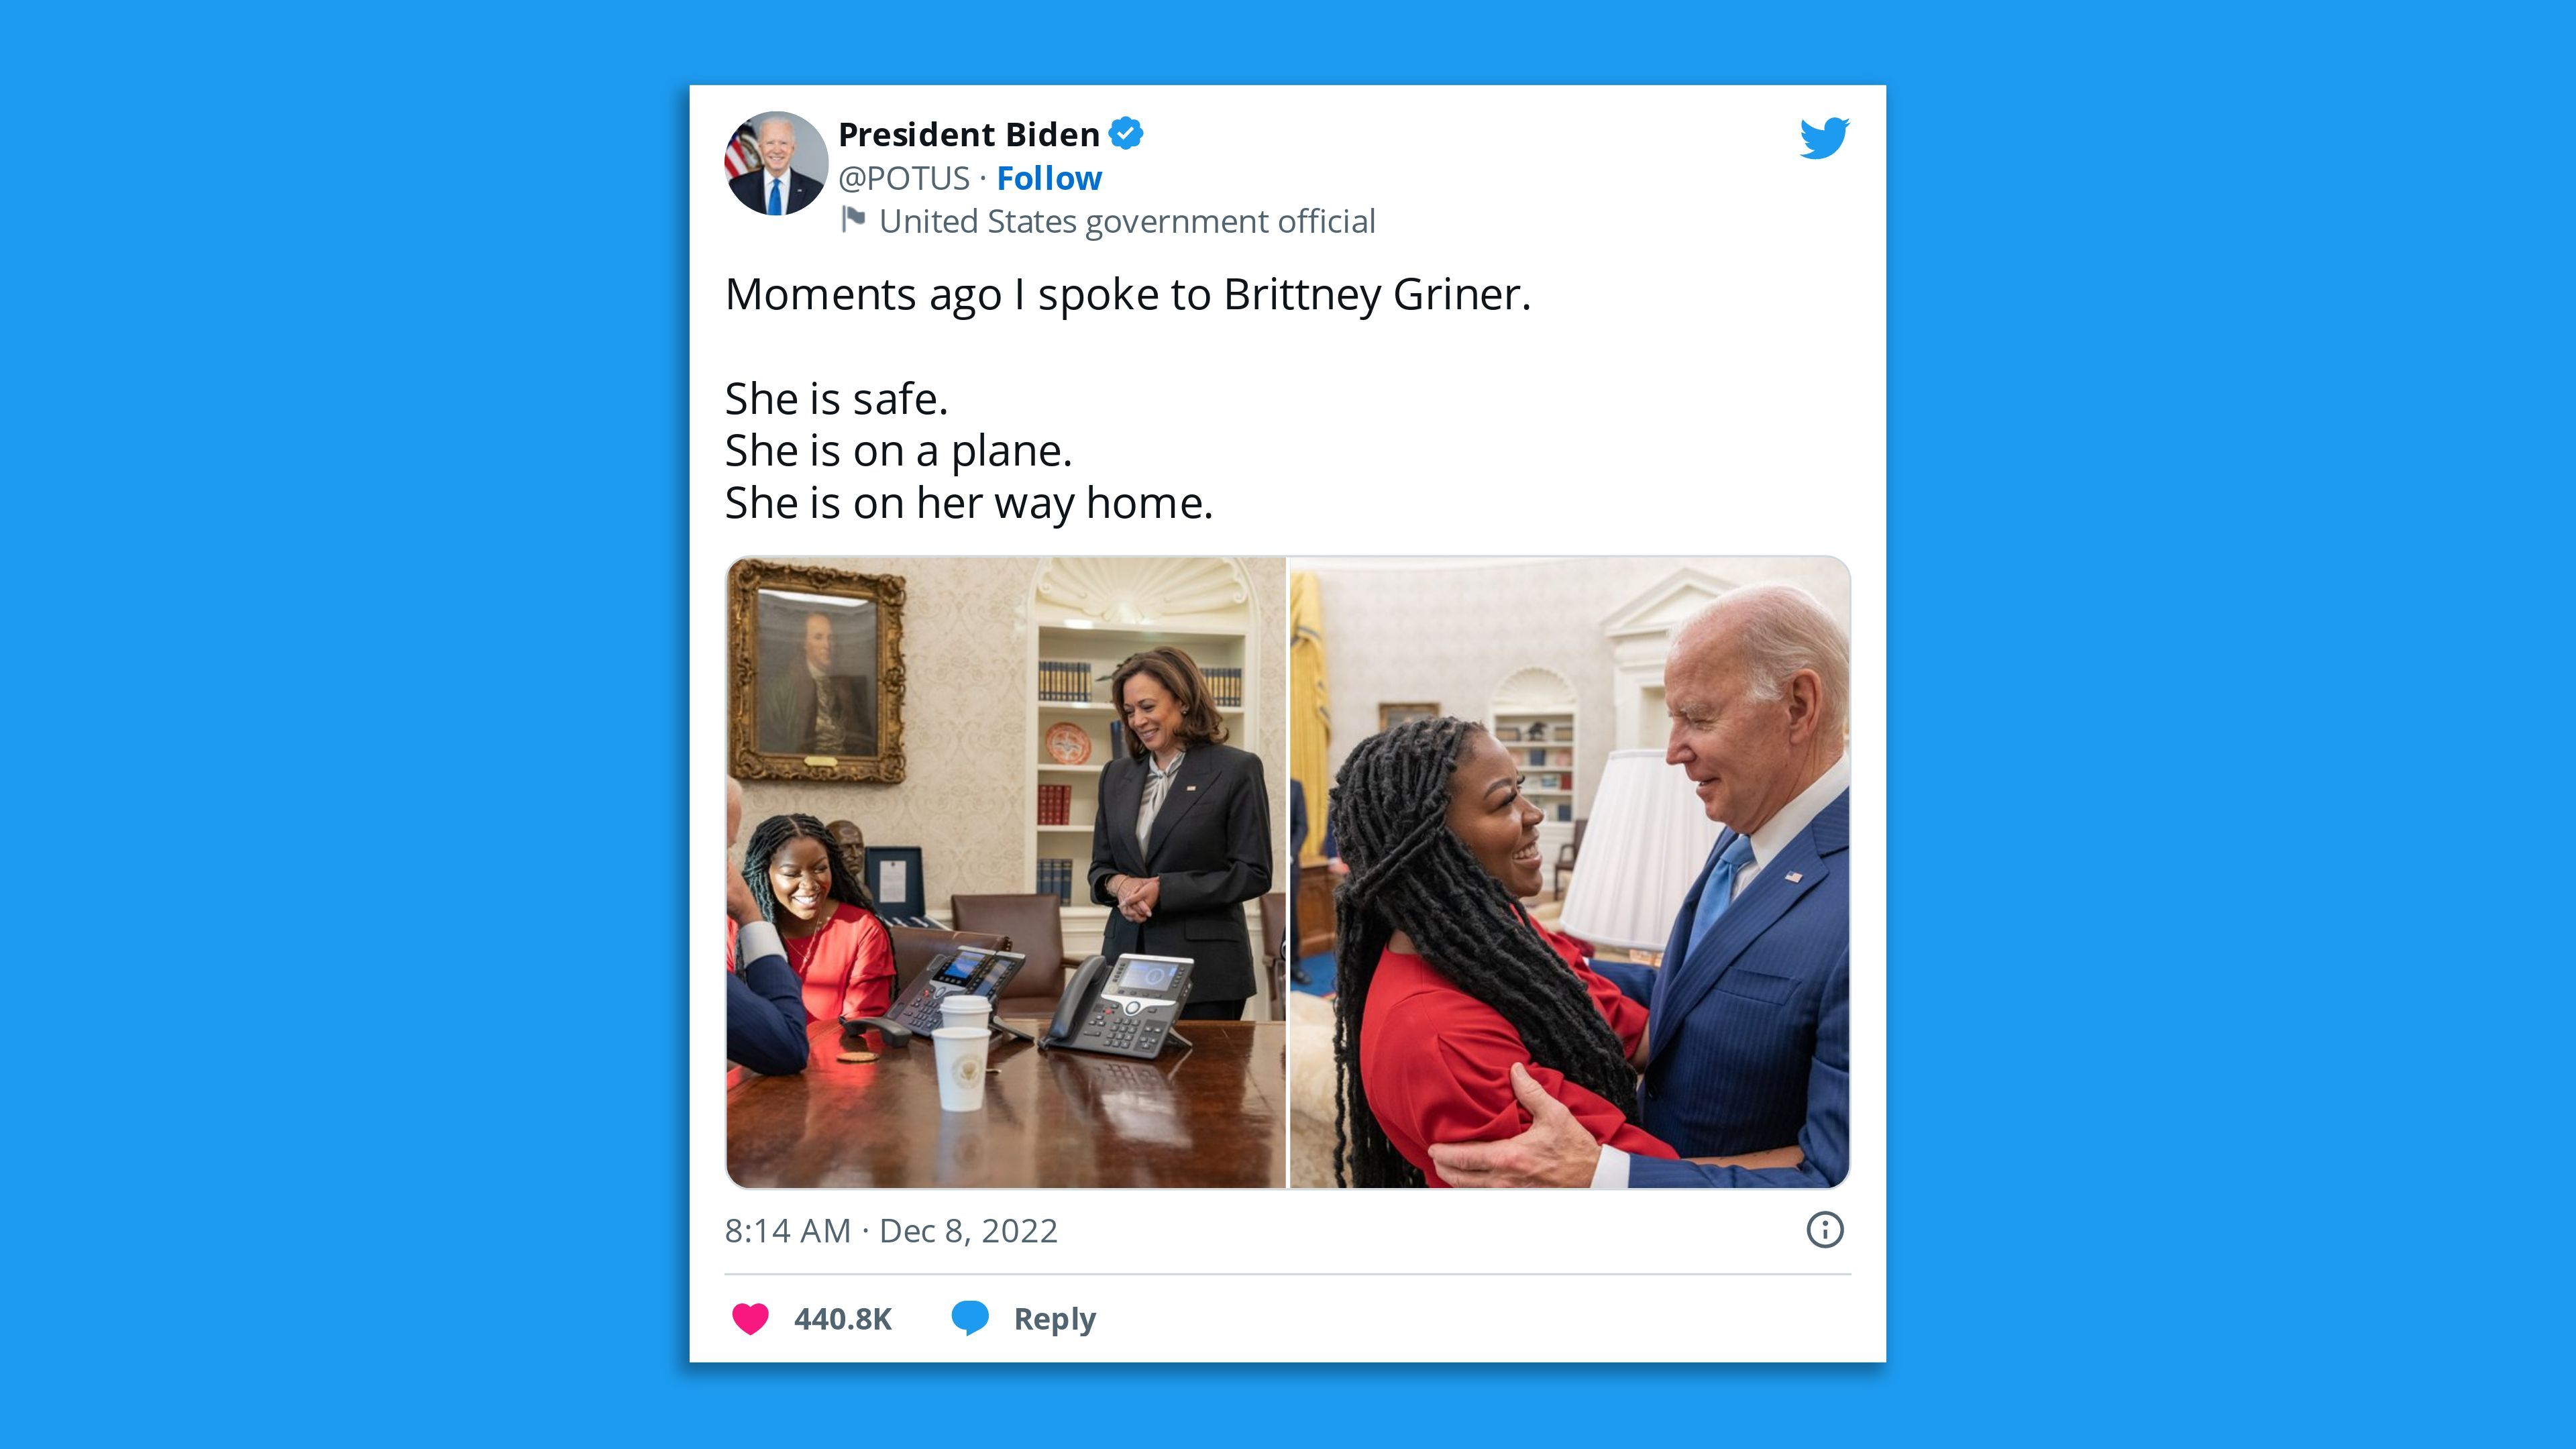 A Twitter screenshot shows images of President Biden and Vice President Kamala Harris with Britney Griner's mother.